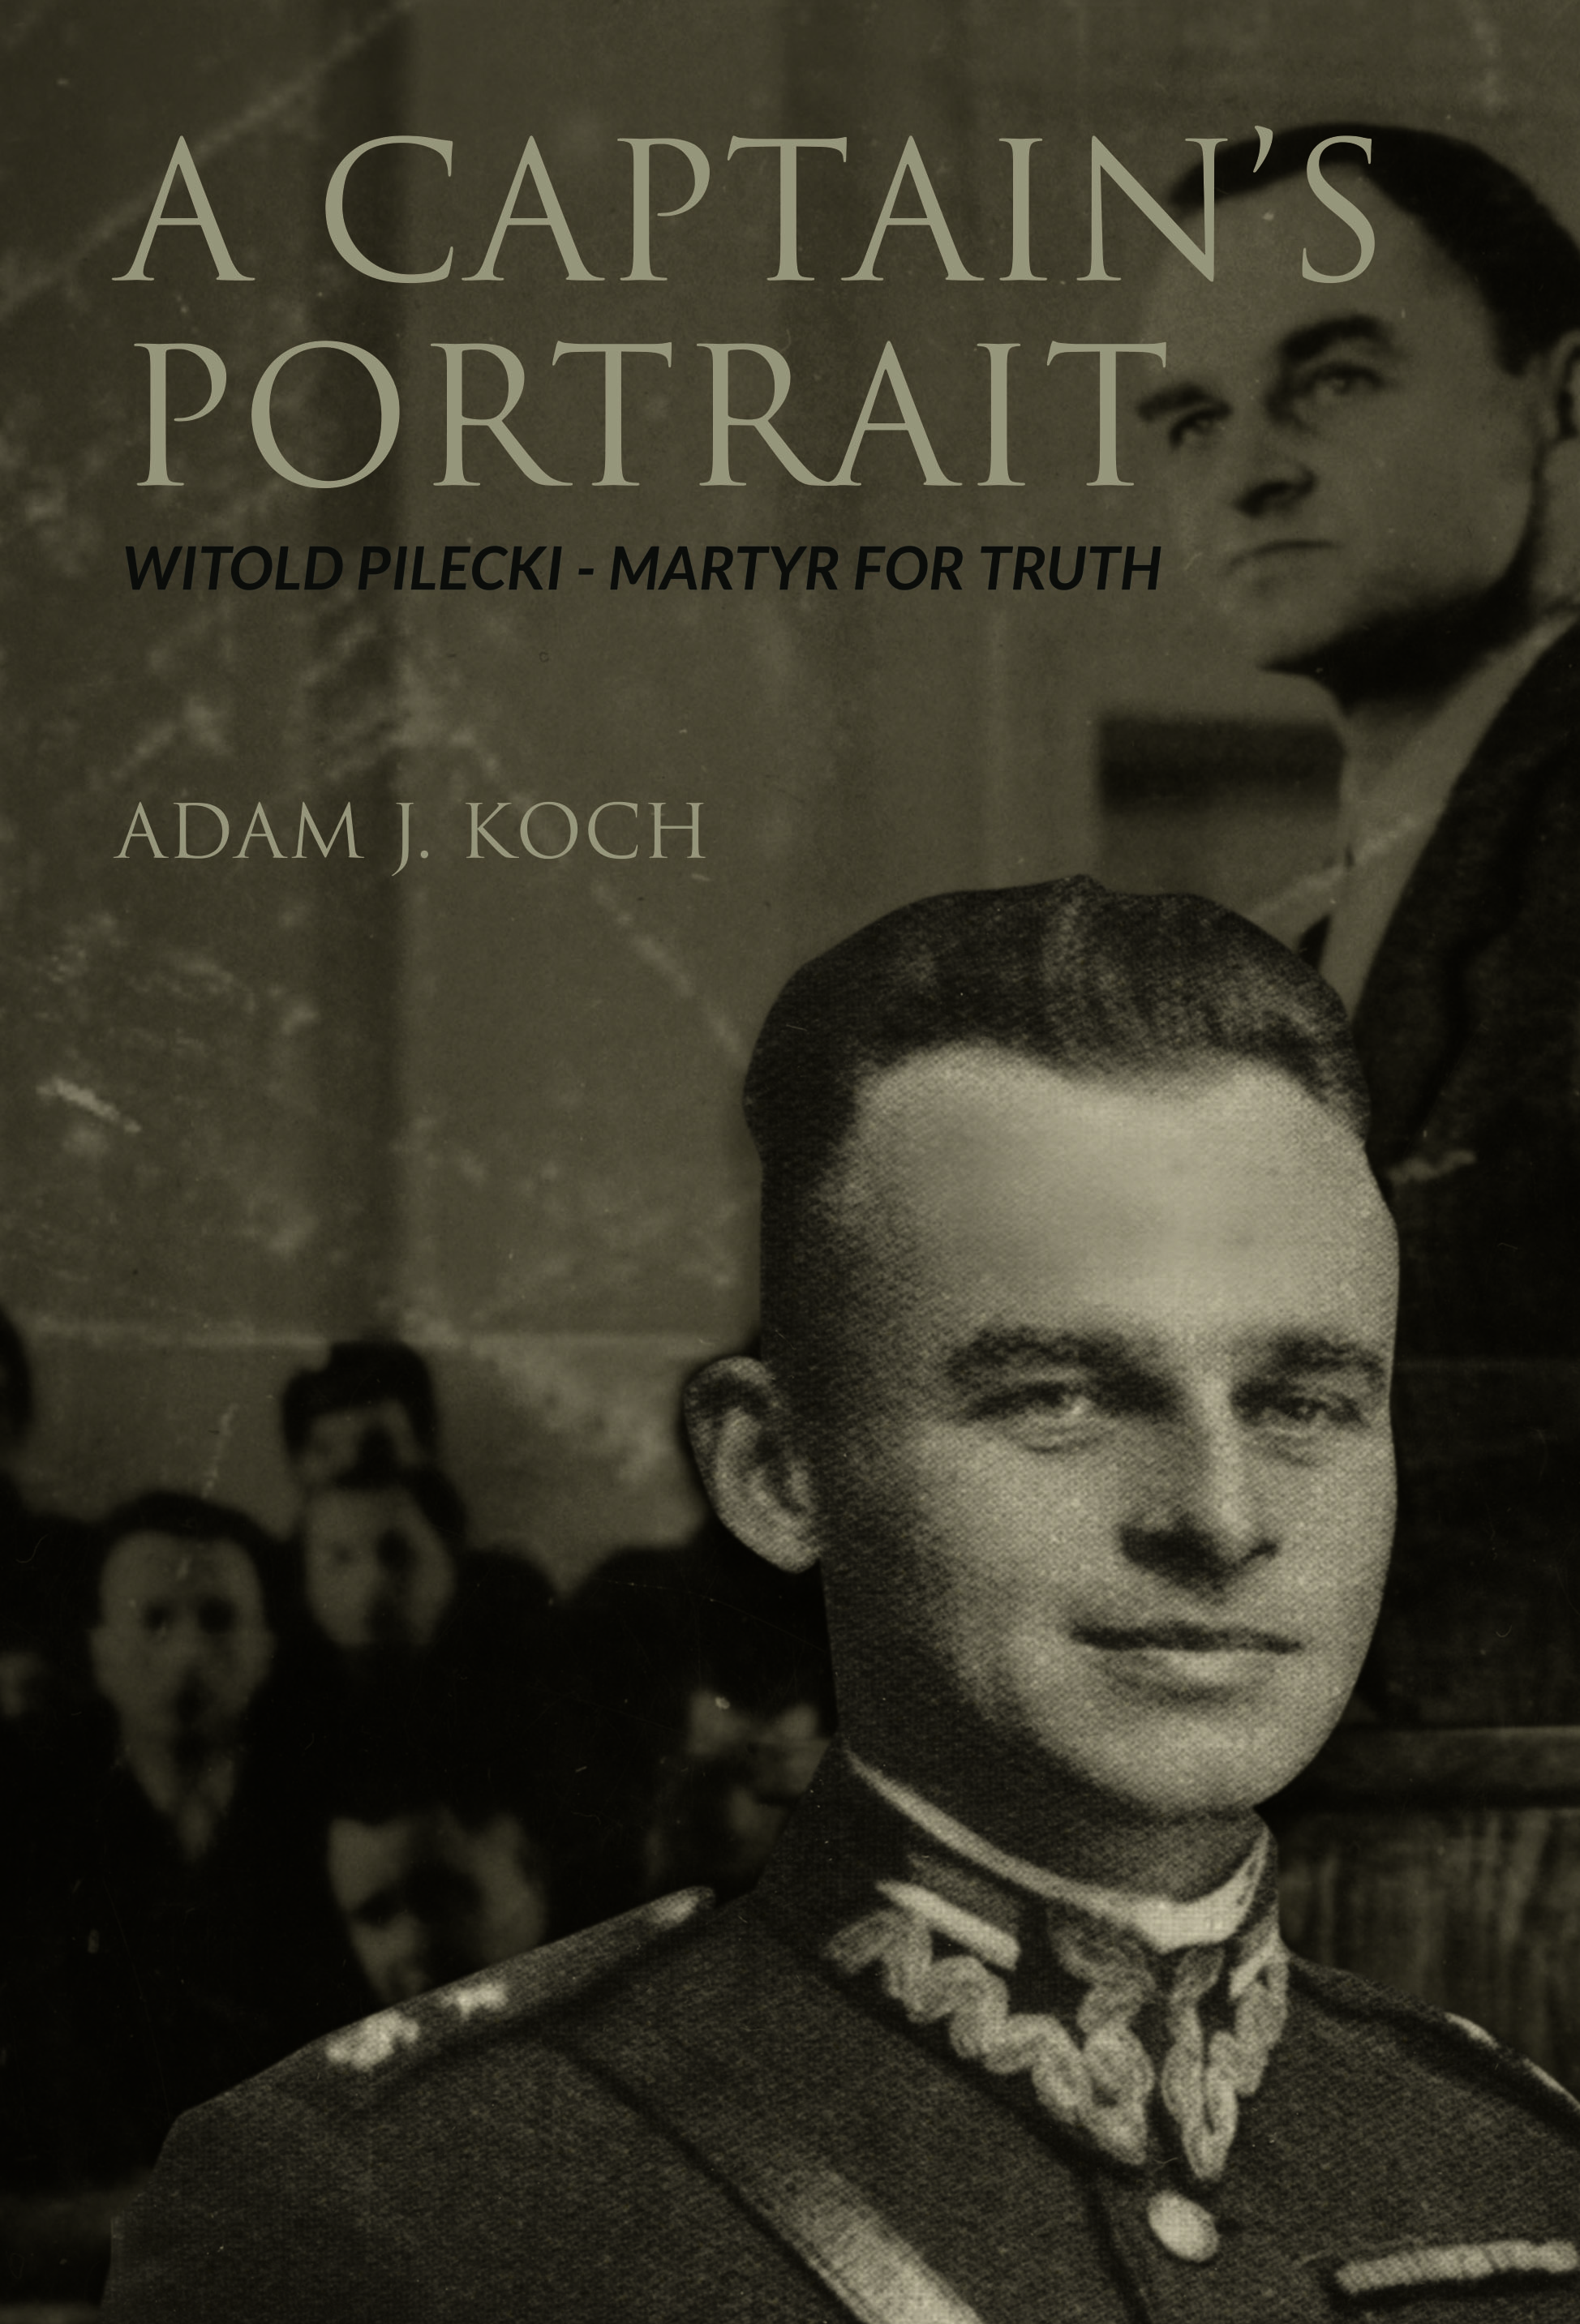 A Captain's Portrait Witold Pilecki - Martyr for Truth / Adam J Koch